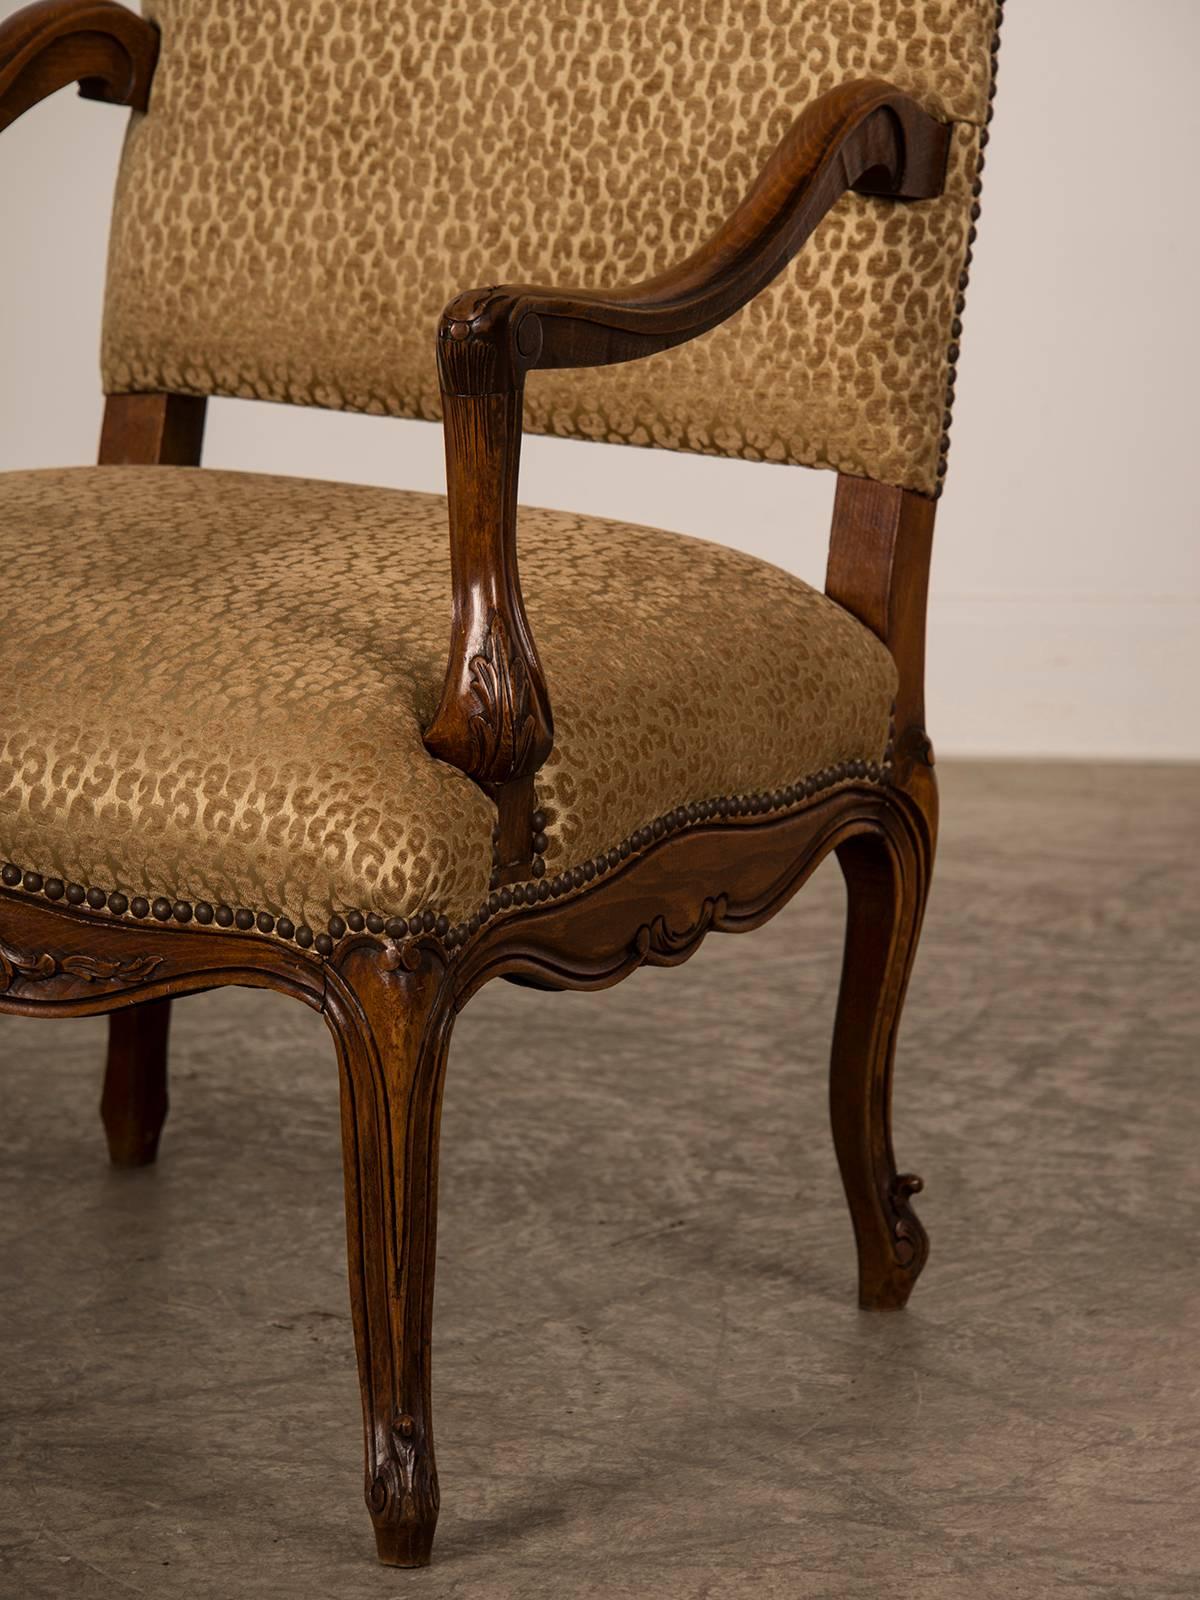 Carved Antique French Louis XV Style Walnut Armchair ‘Fauteuil’, circa 1880 For Sale